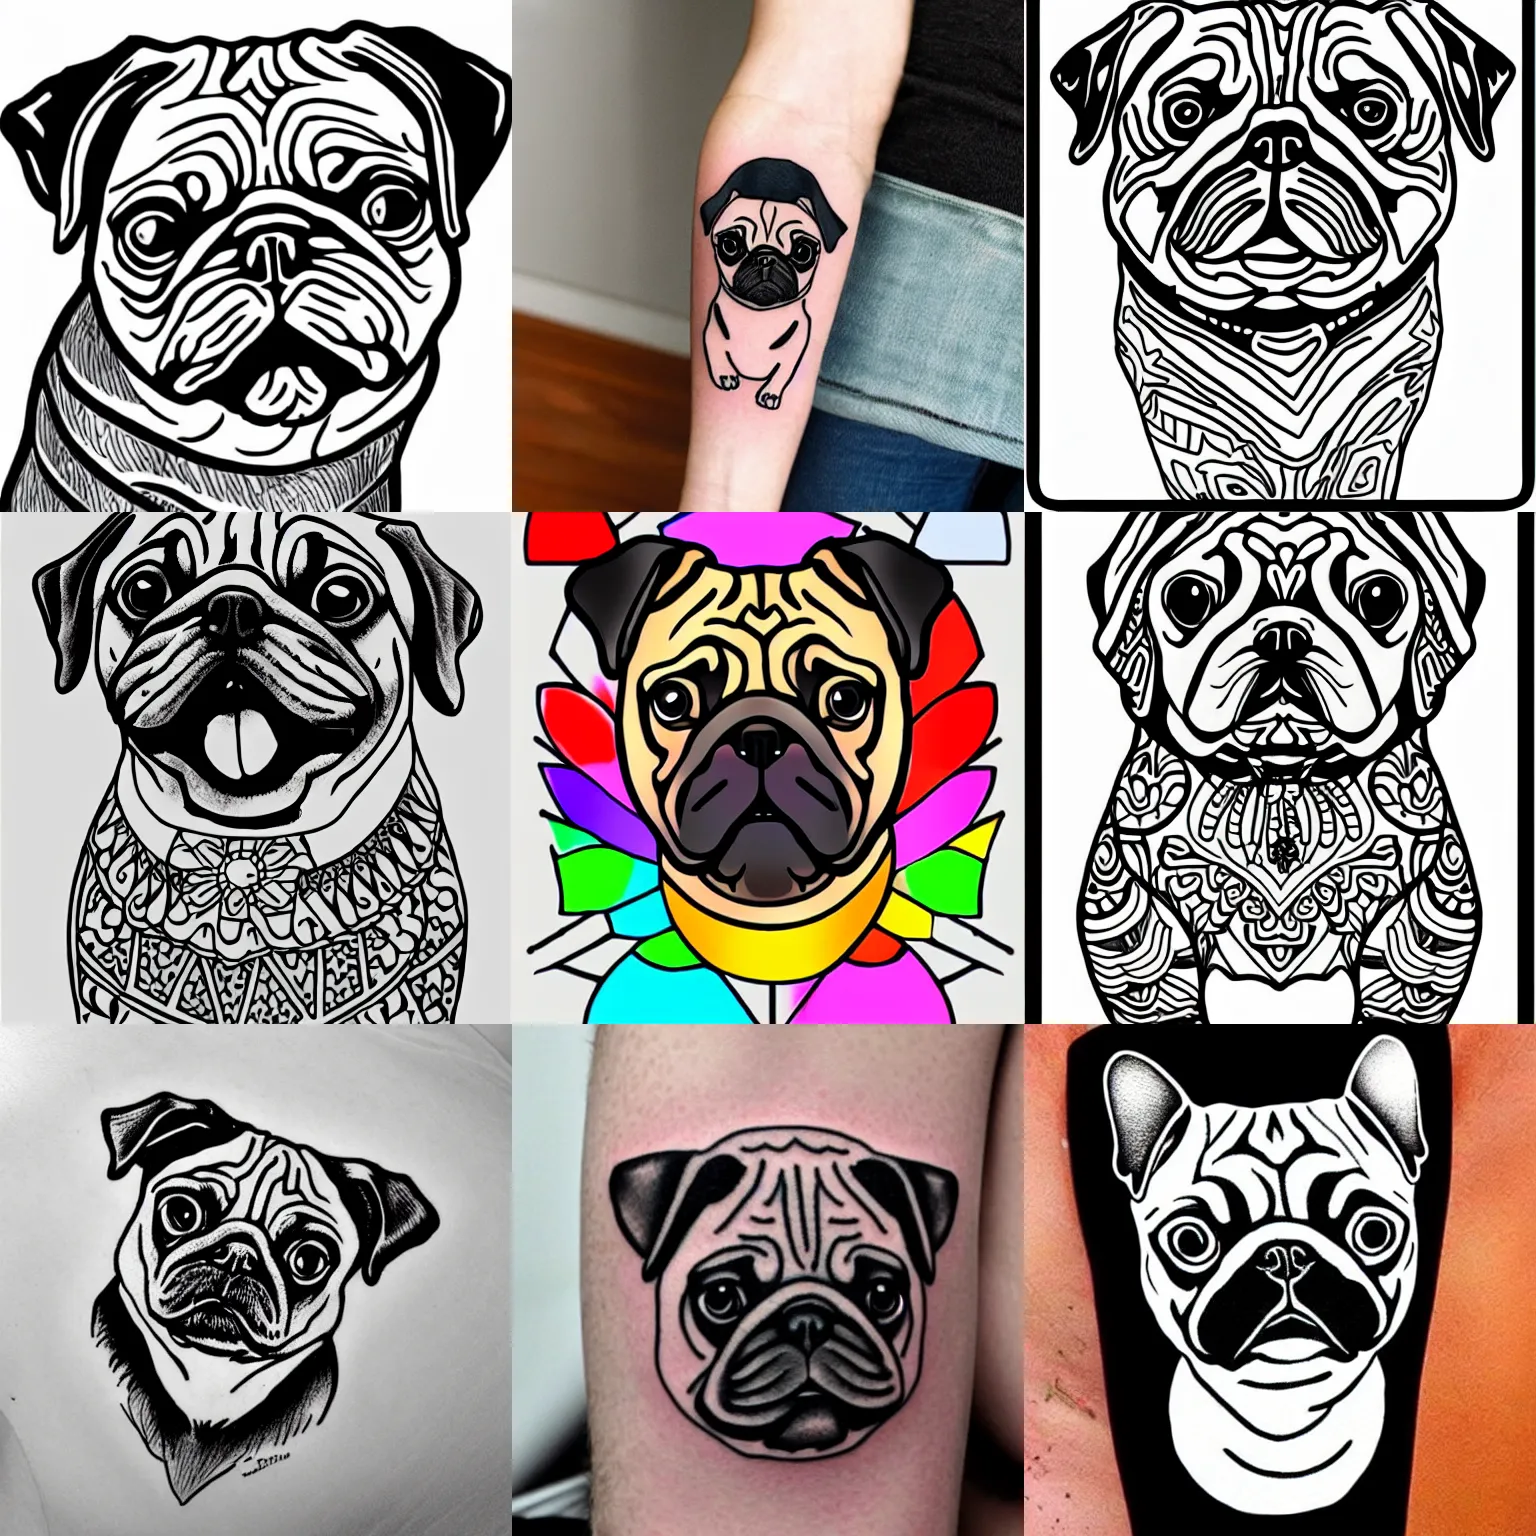 Buy Pug Temporary Fake Tattoo Sticker set of 2 Online in India - Etsy